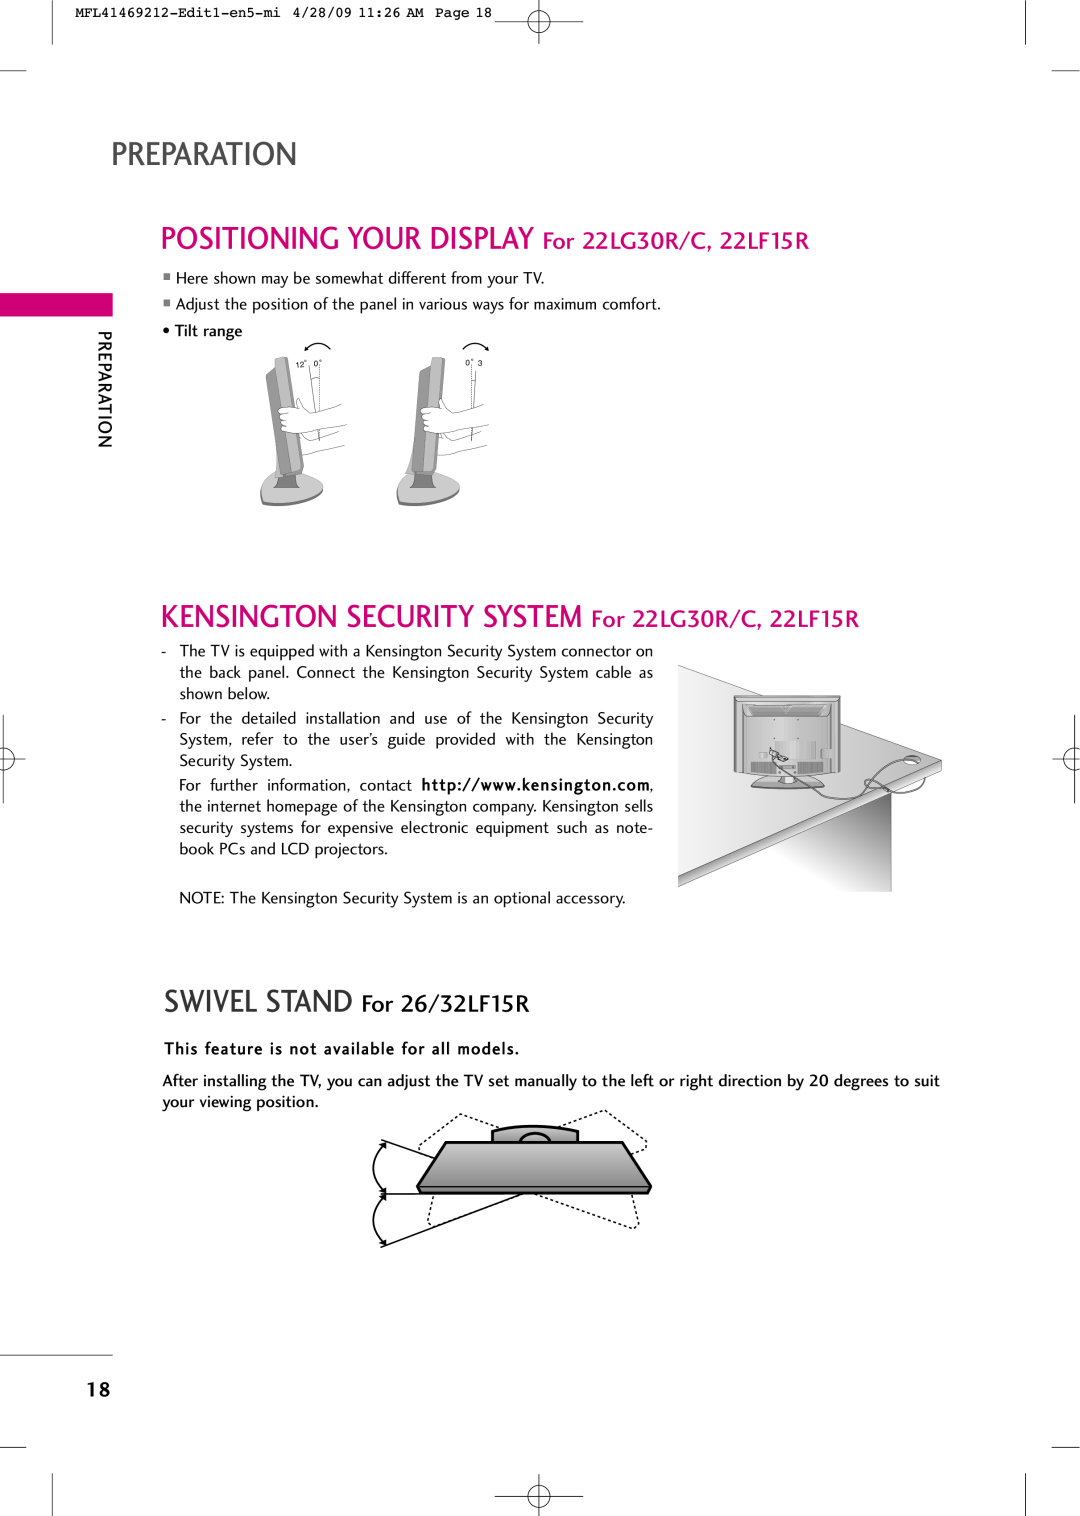 LG Electronics 2230R-MA POSITIONING YOUR DISPLAY For 22LG30R/C, 22LF15R, KENSINGTON SECURITY SYSTEM For 22LG30R/C, 22LF15R 